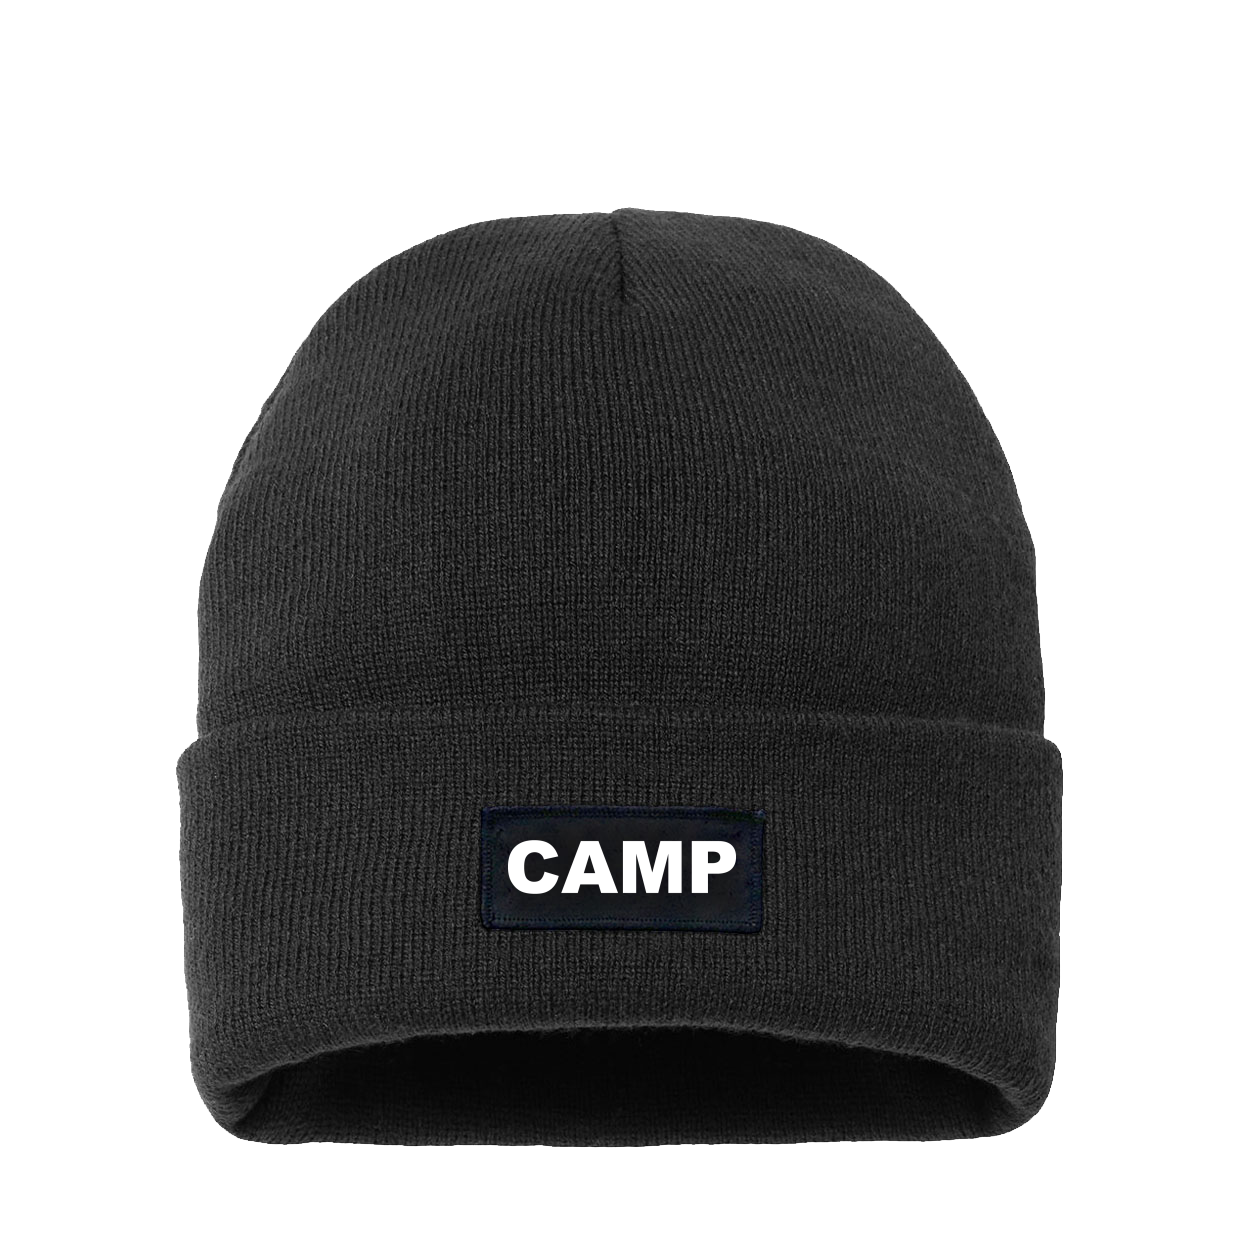 Camp Brand Logo Night Out Woven Patch Night Out Sherpa Lined Cuffed Beanie Black